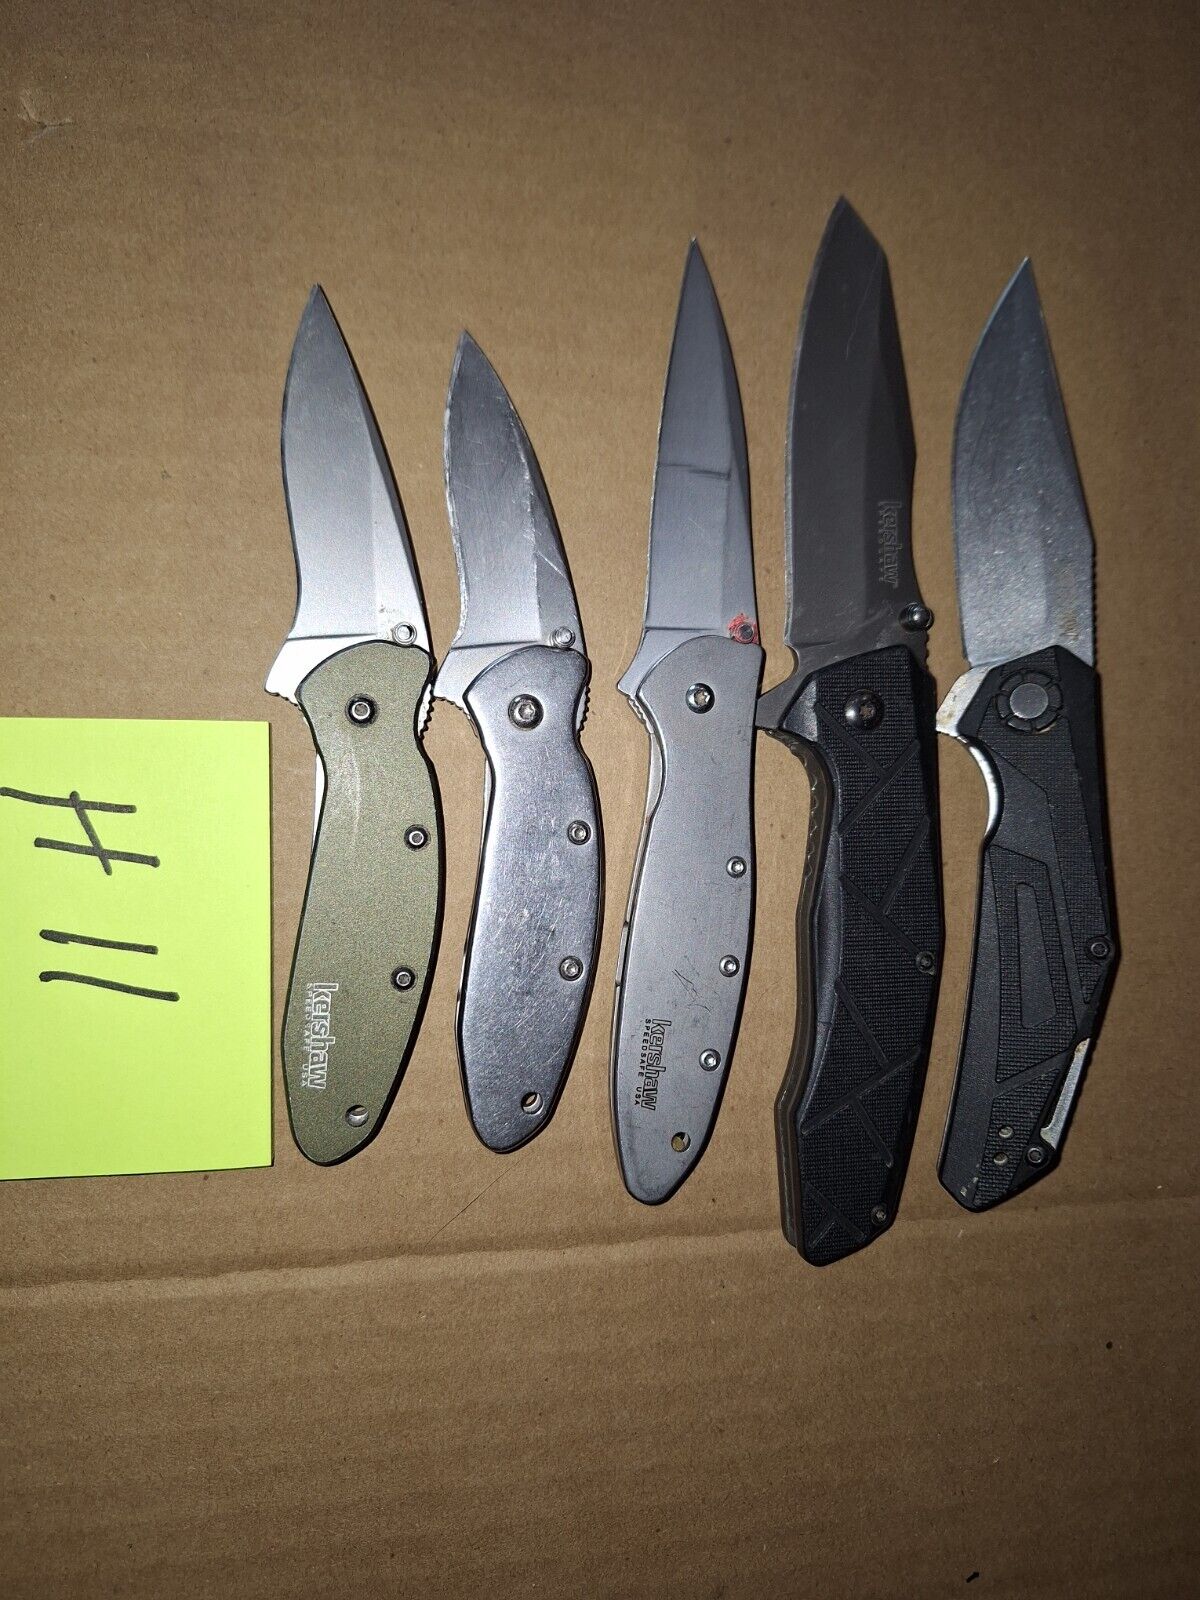 5 Assorted KERSHAW KNIVES   AIRPORT CONFISCATION   Lot H11